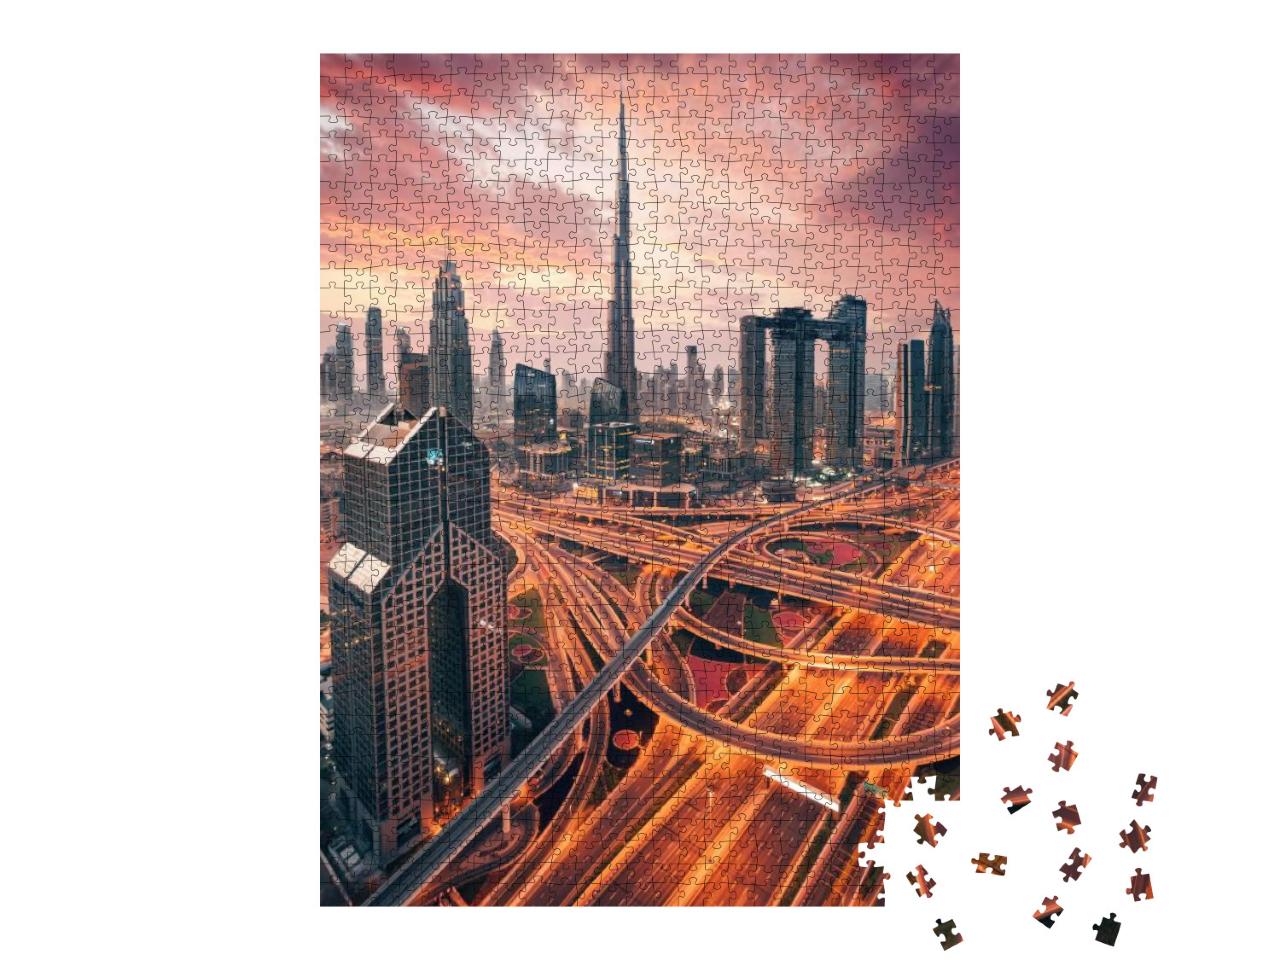 Beautiful Sunrise Above Downtown Dubai... Jigsaw Puzzle with 1000 pieces